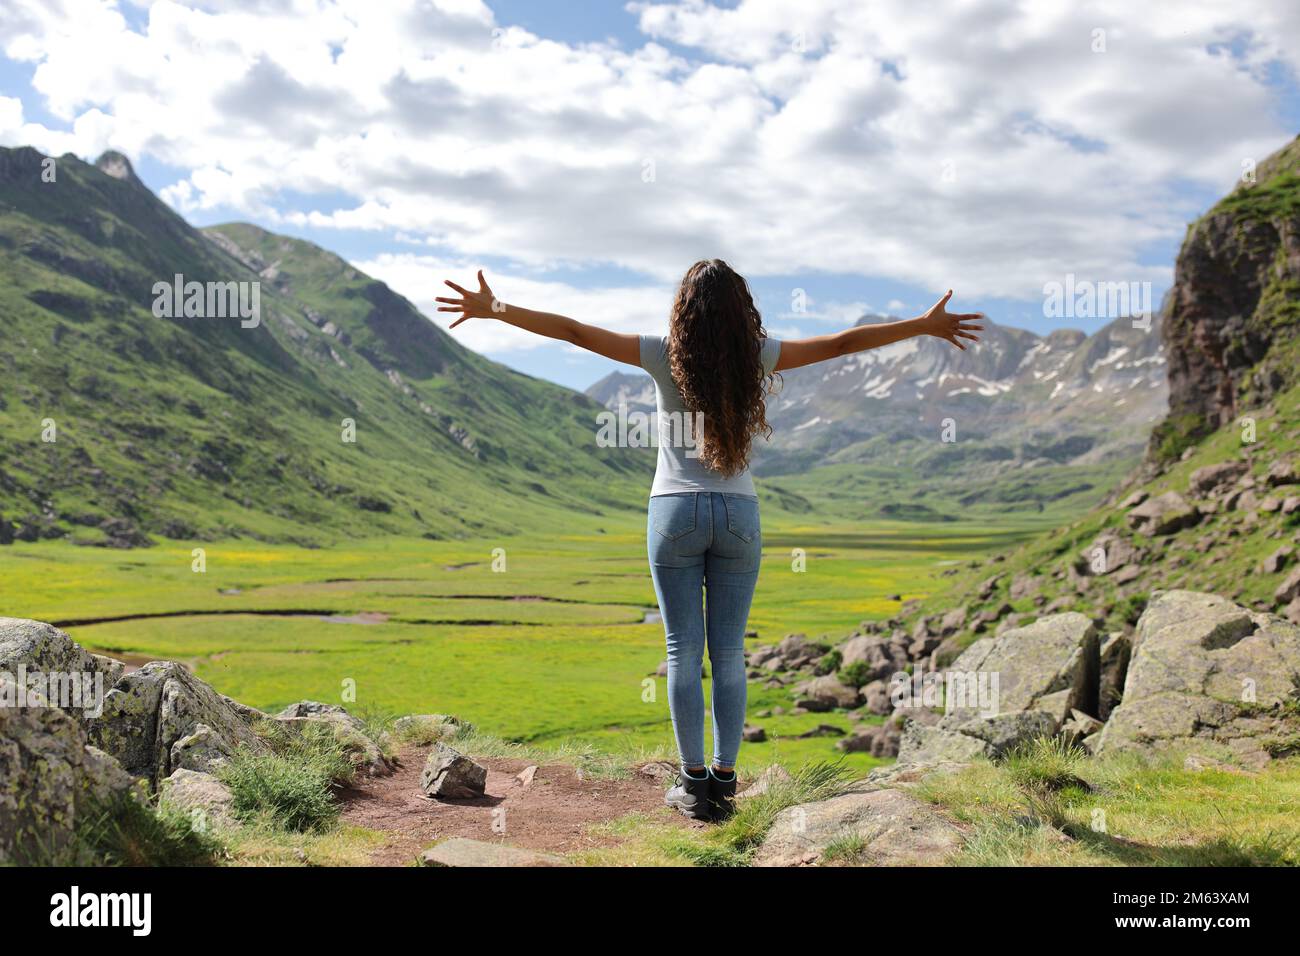 Back view portrait of an ecotourist celebrating summer vacation in the mountain outstretching arms Stock Photo